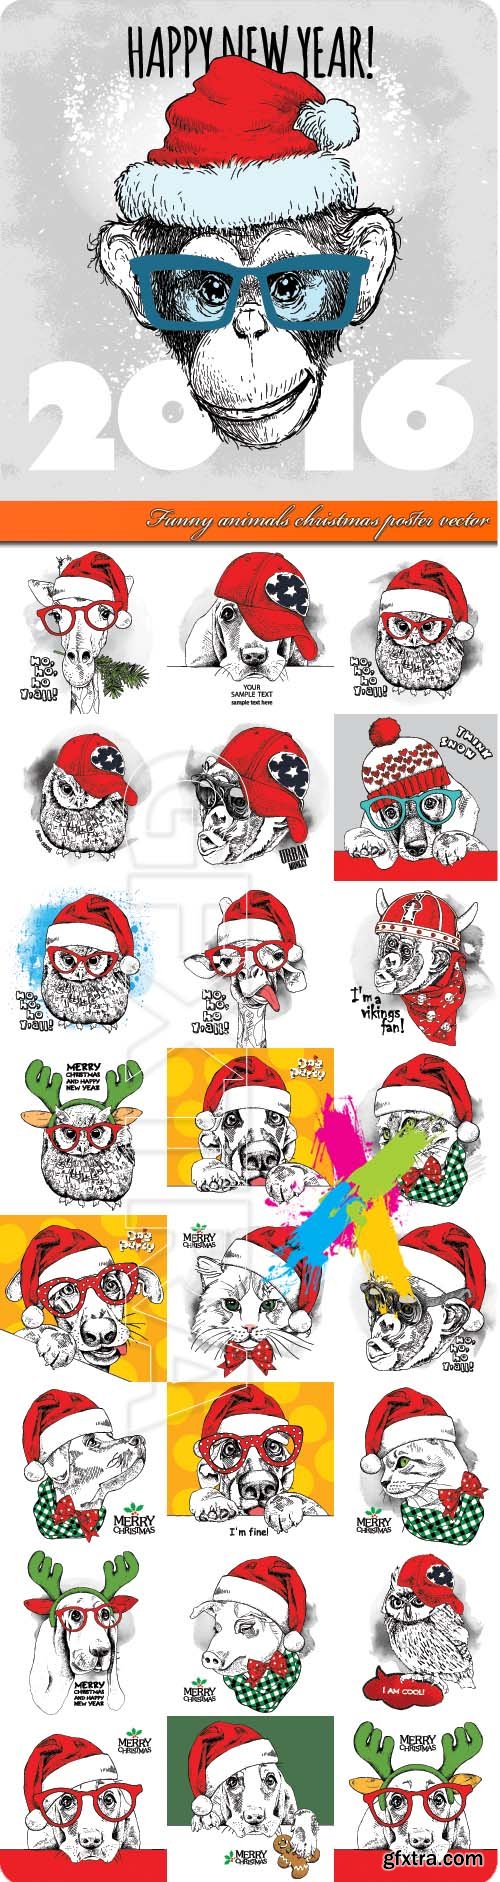 Funny animals christmas poster vector